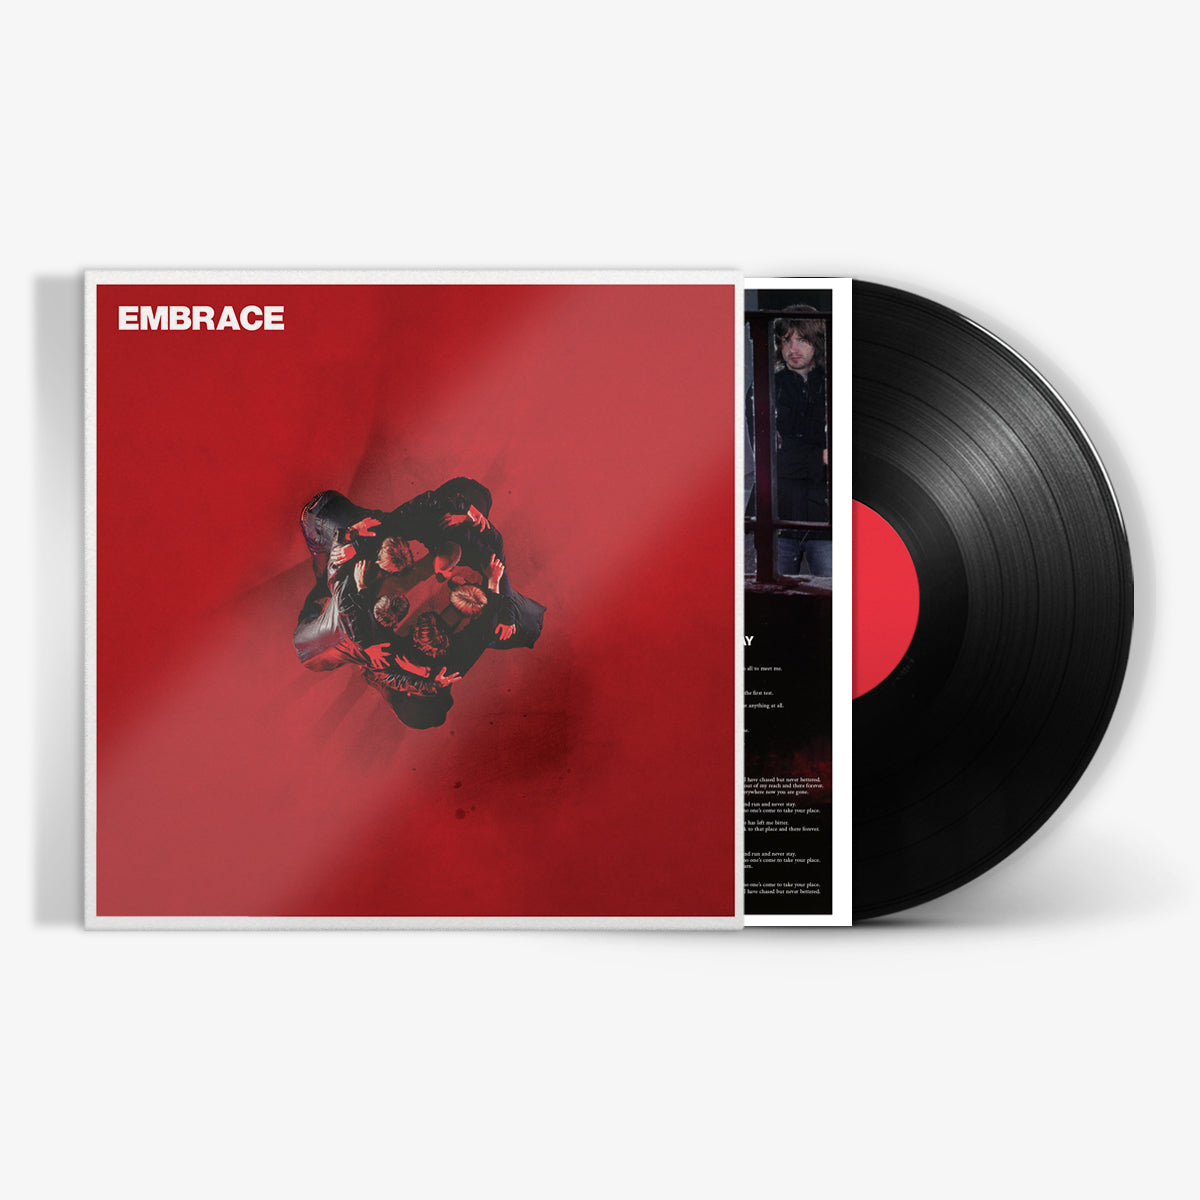 Embrace - Out Of Nothing: 180gm Vinyl LP